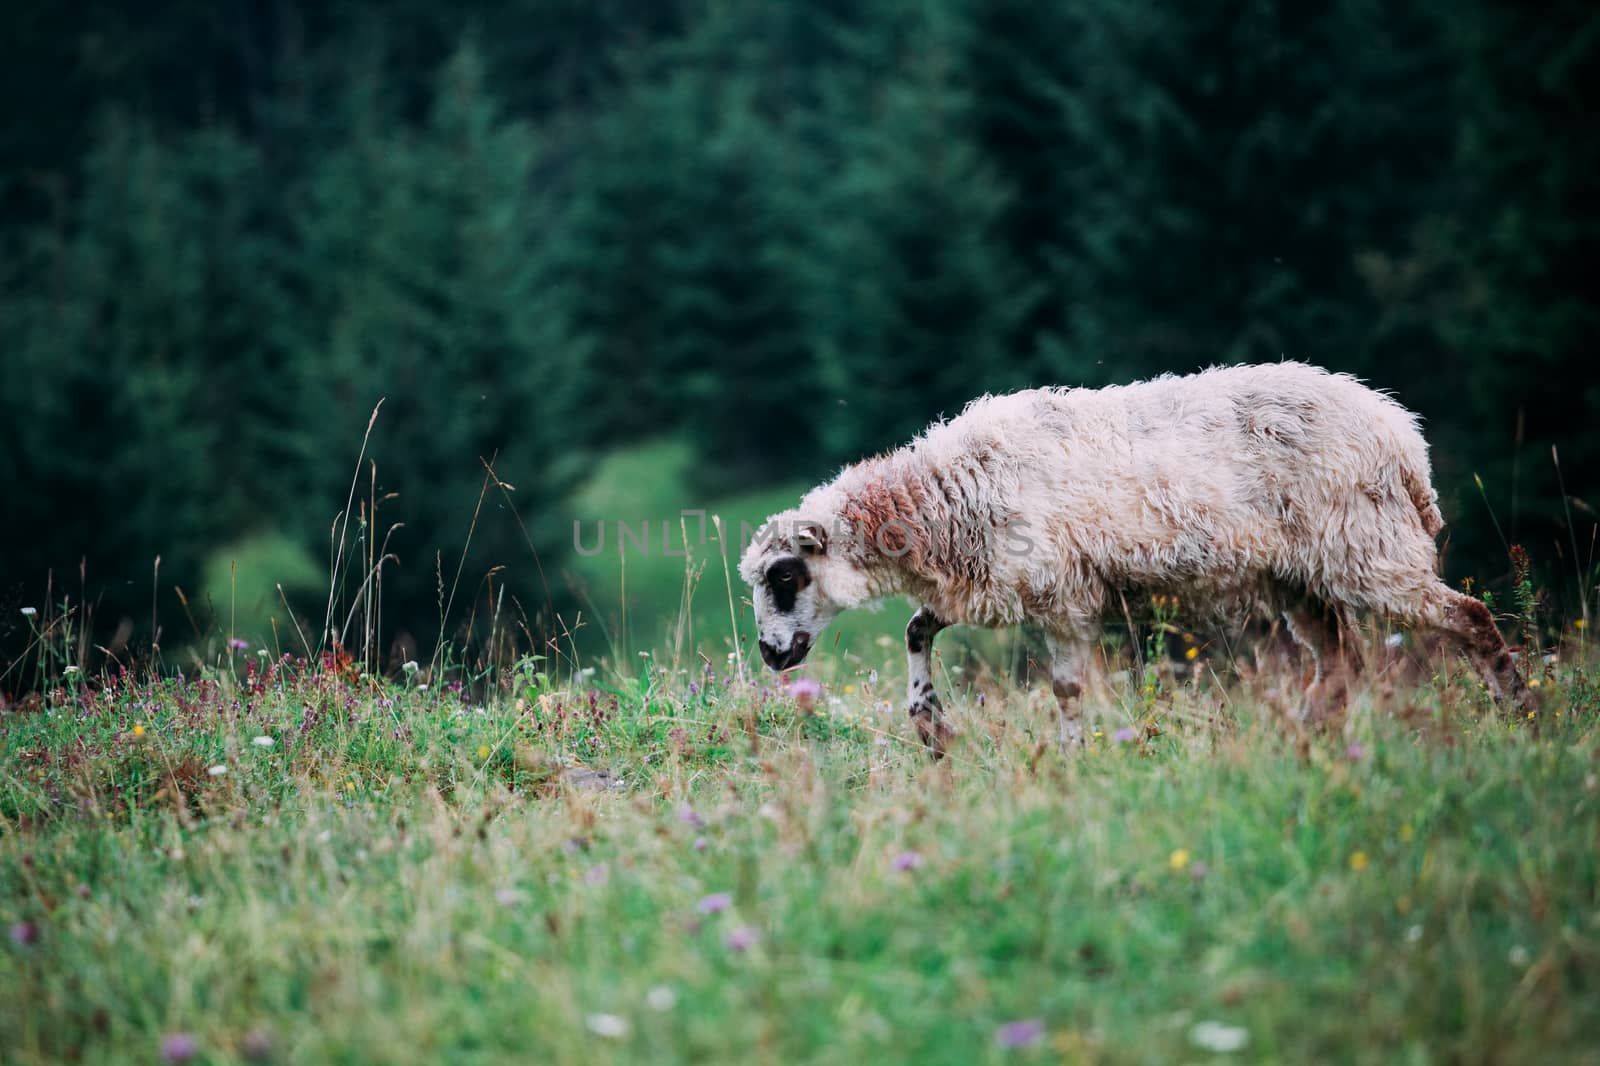 Lamb on a flower hillside. A curly sheep grazes in a meadow.
 by Opikanets